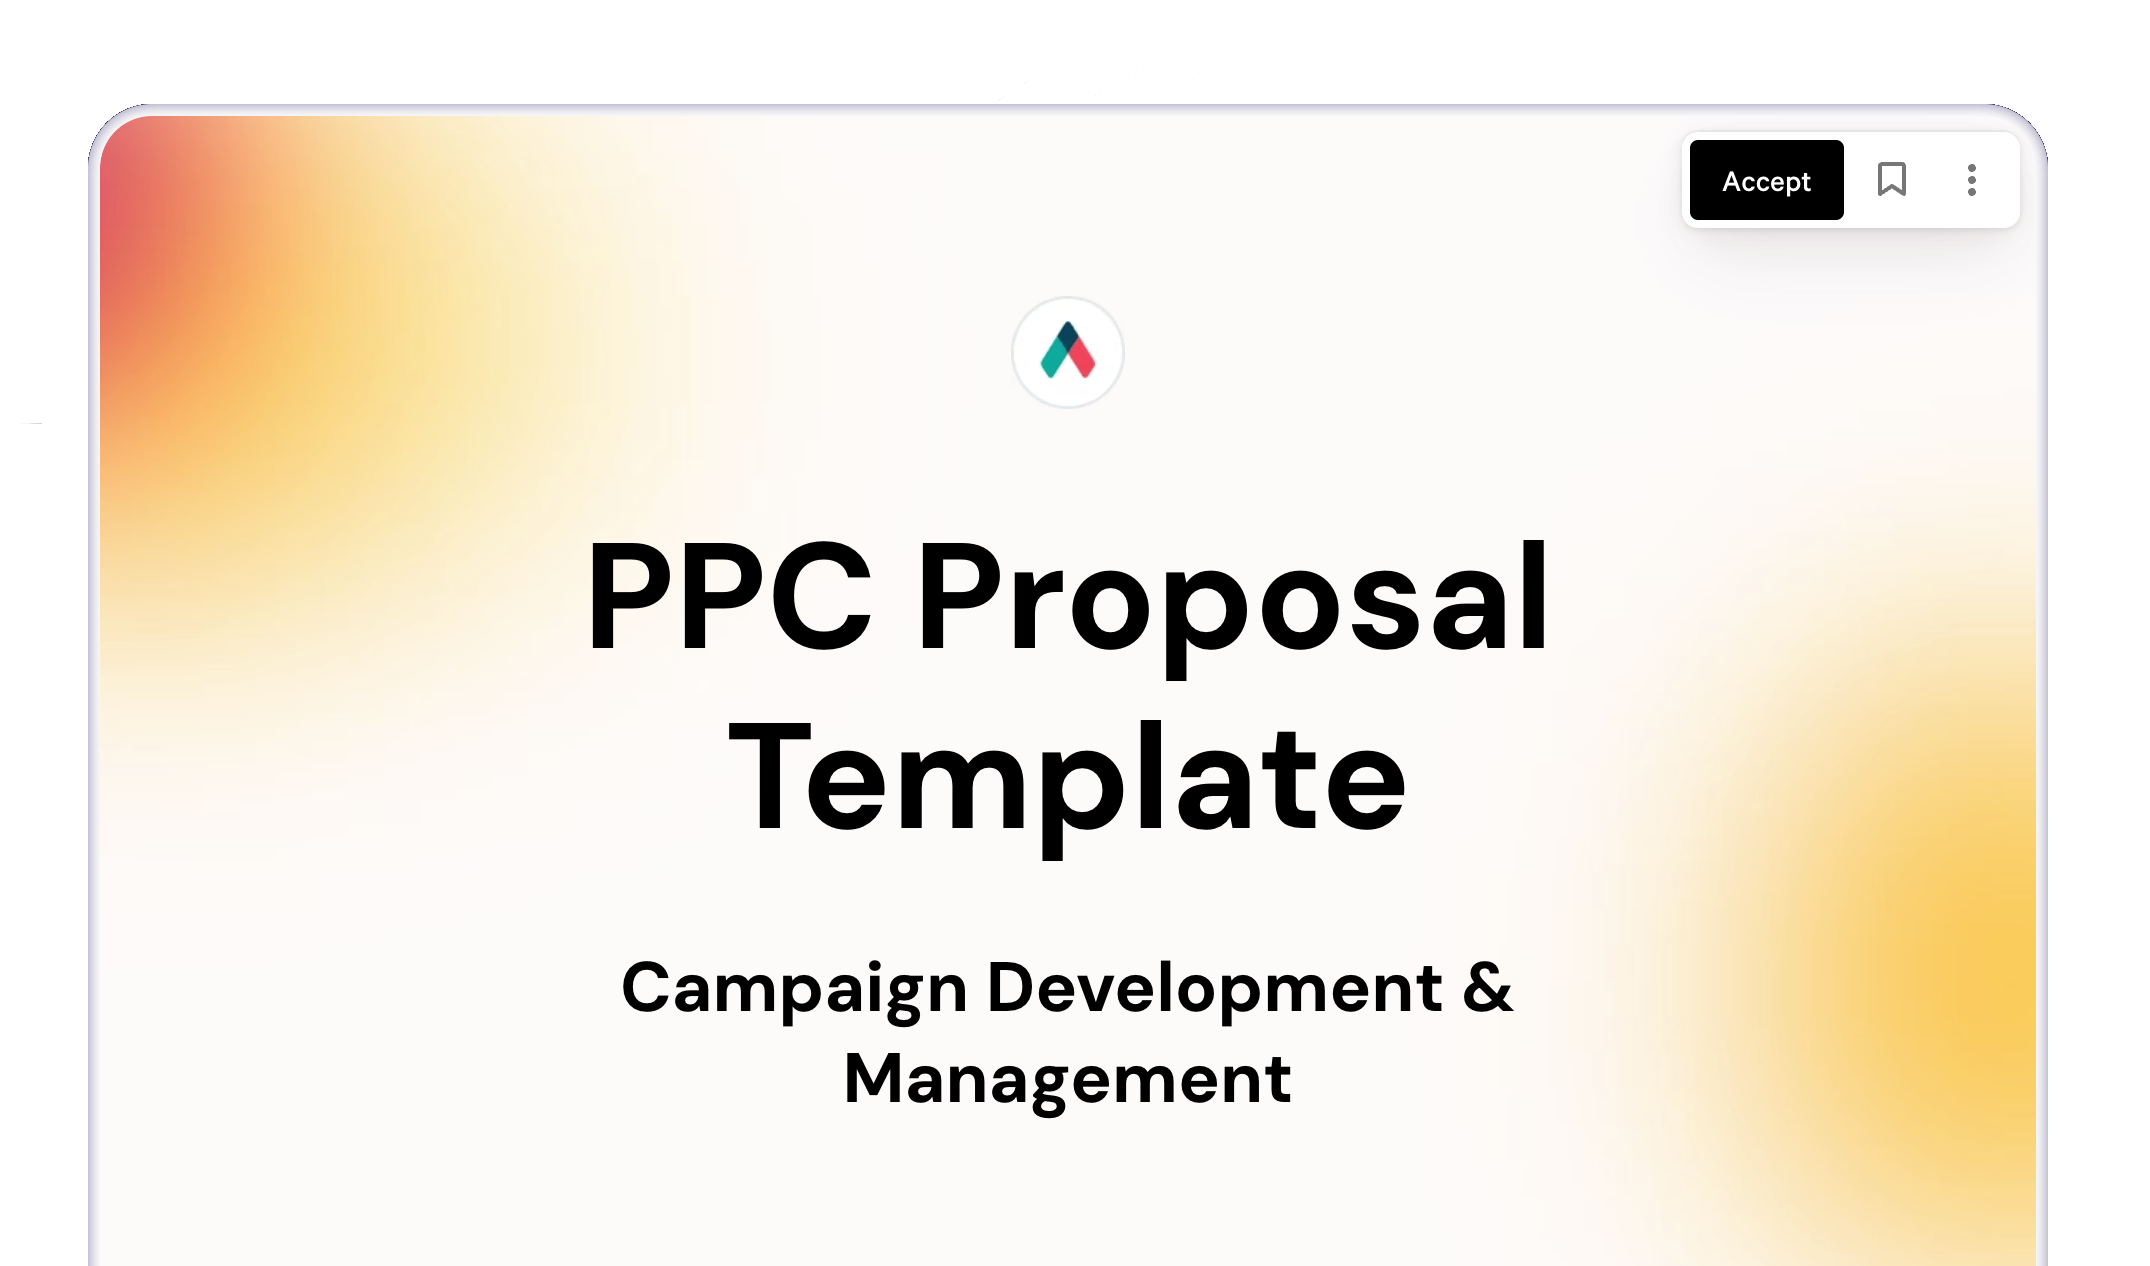 PPC Proposal Template